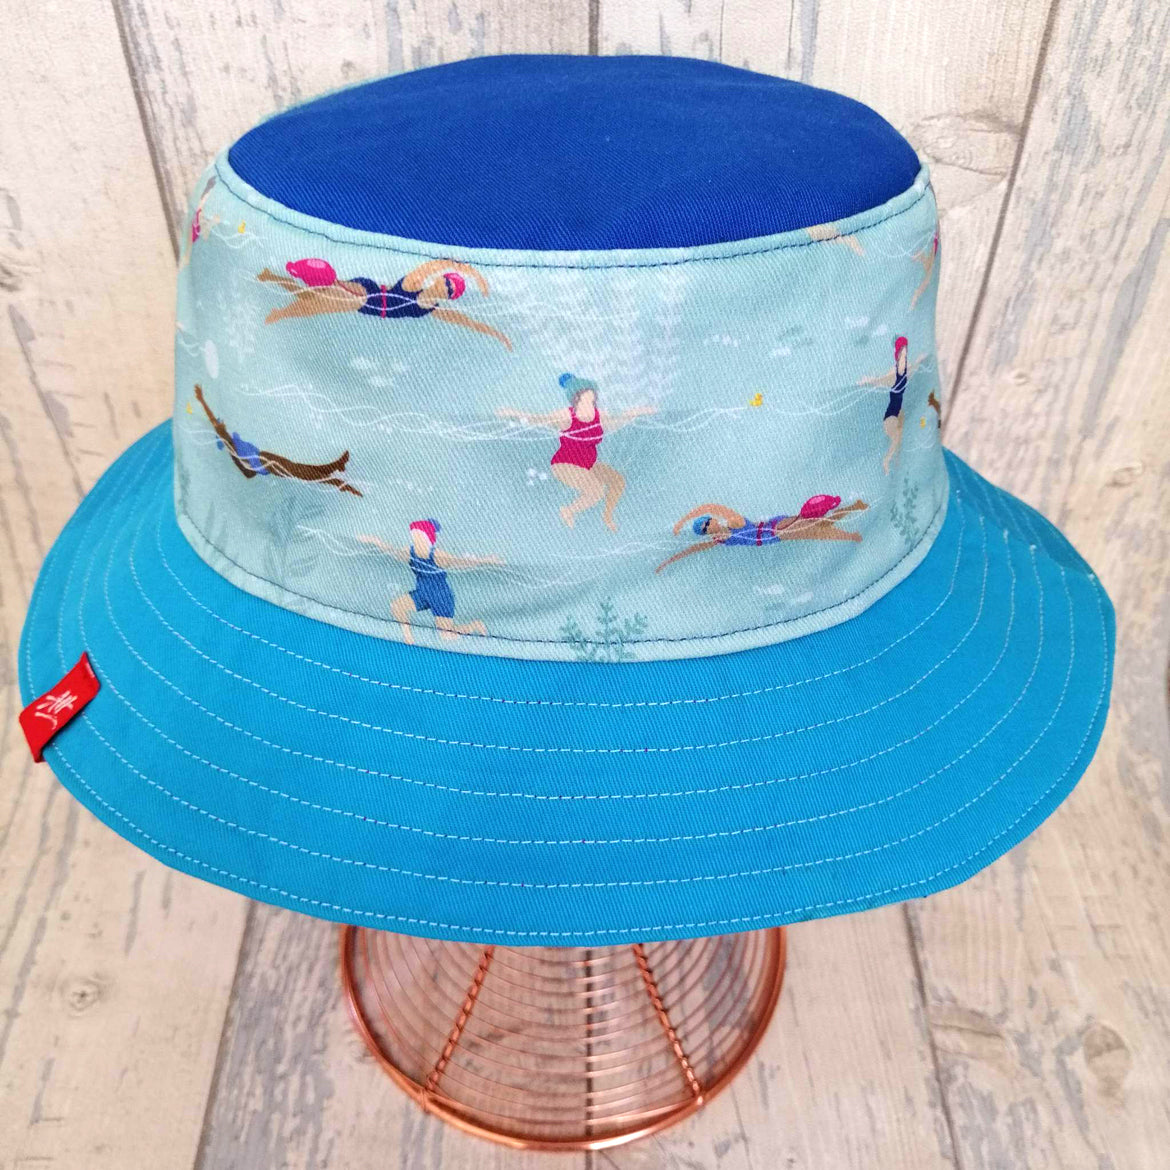 Reversible swimmer's festival bucket hat in all the blues with little swimmers